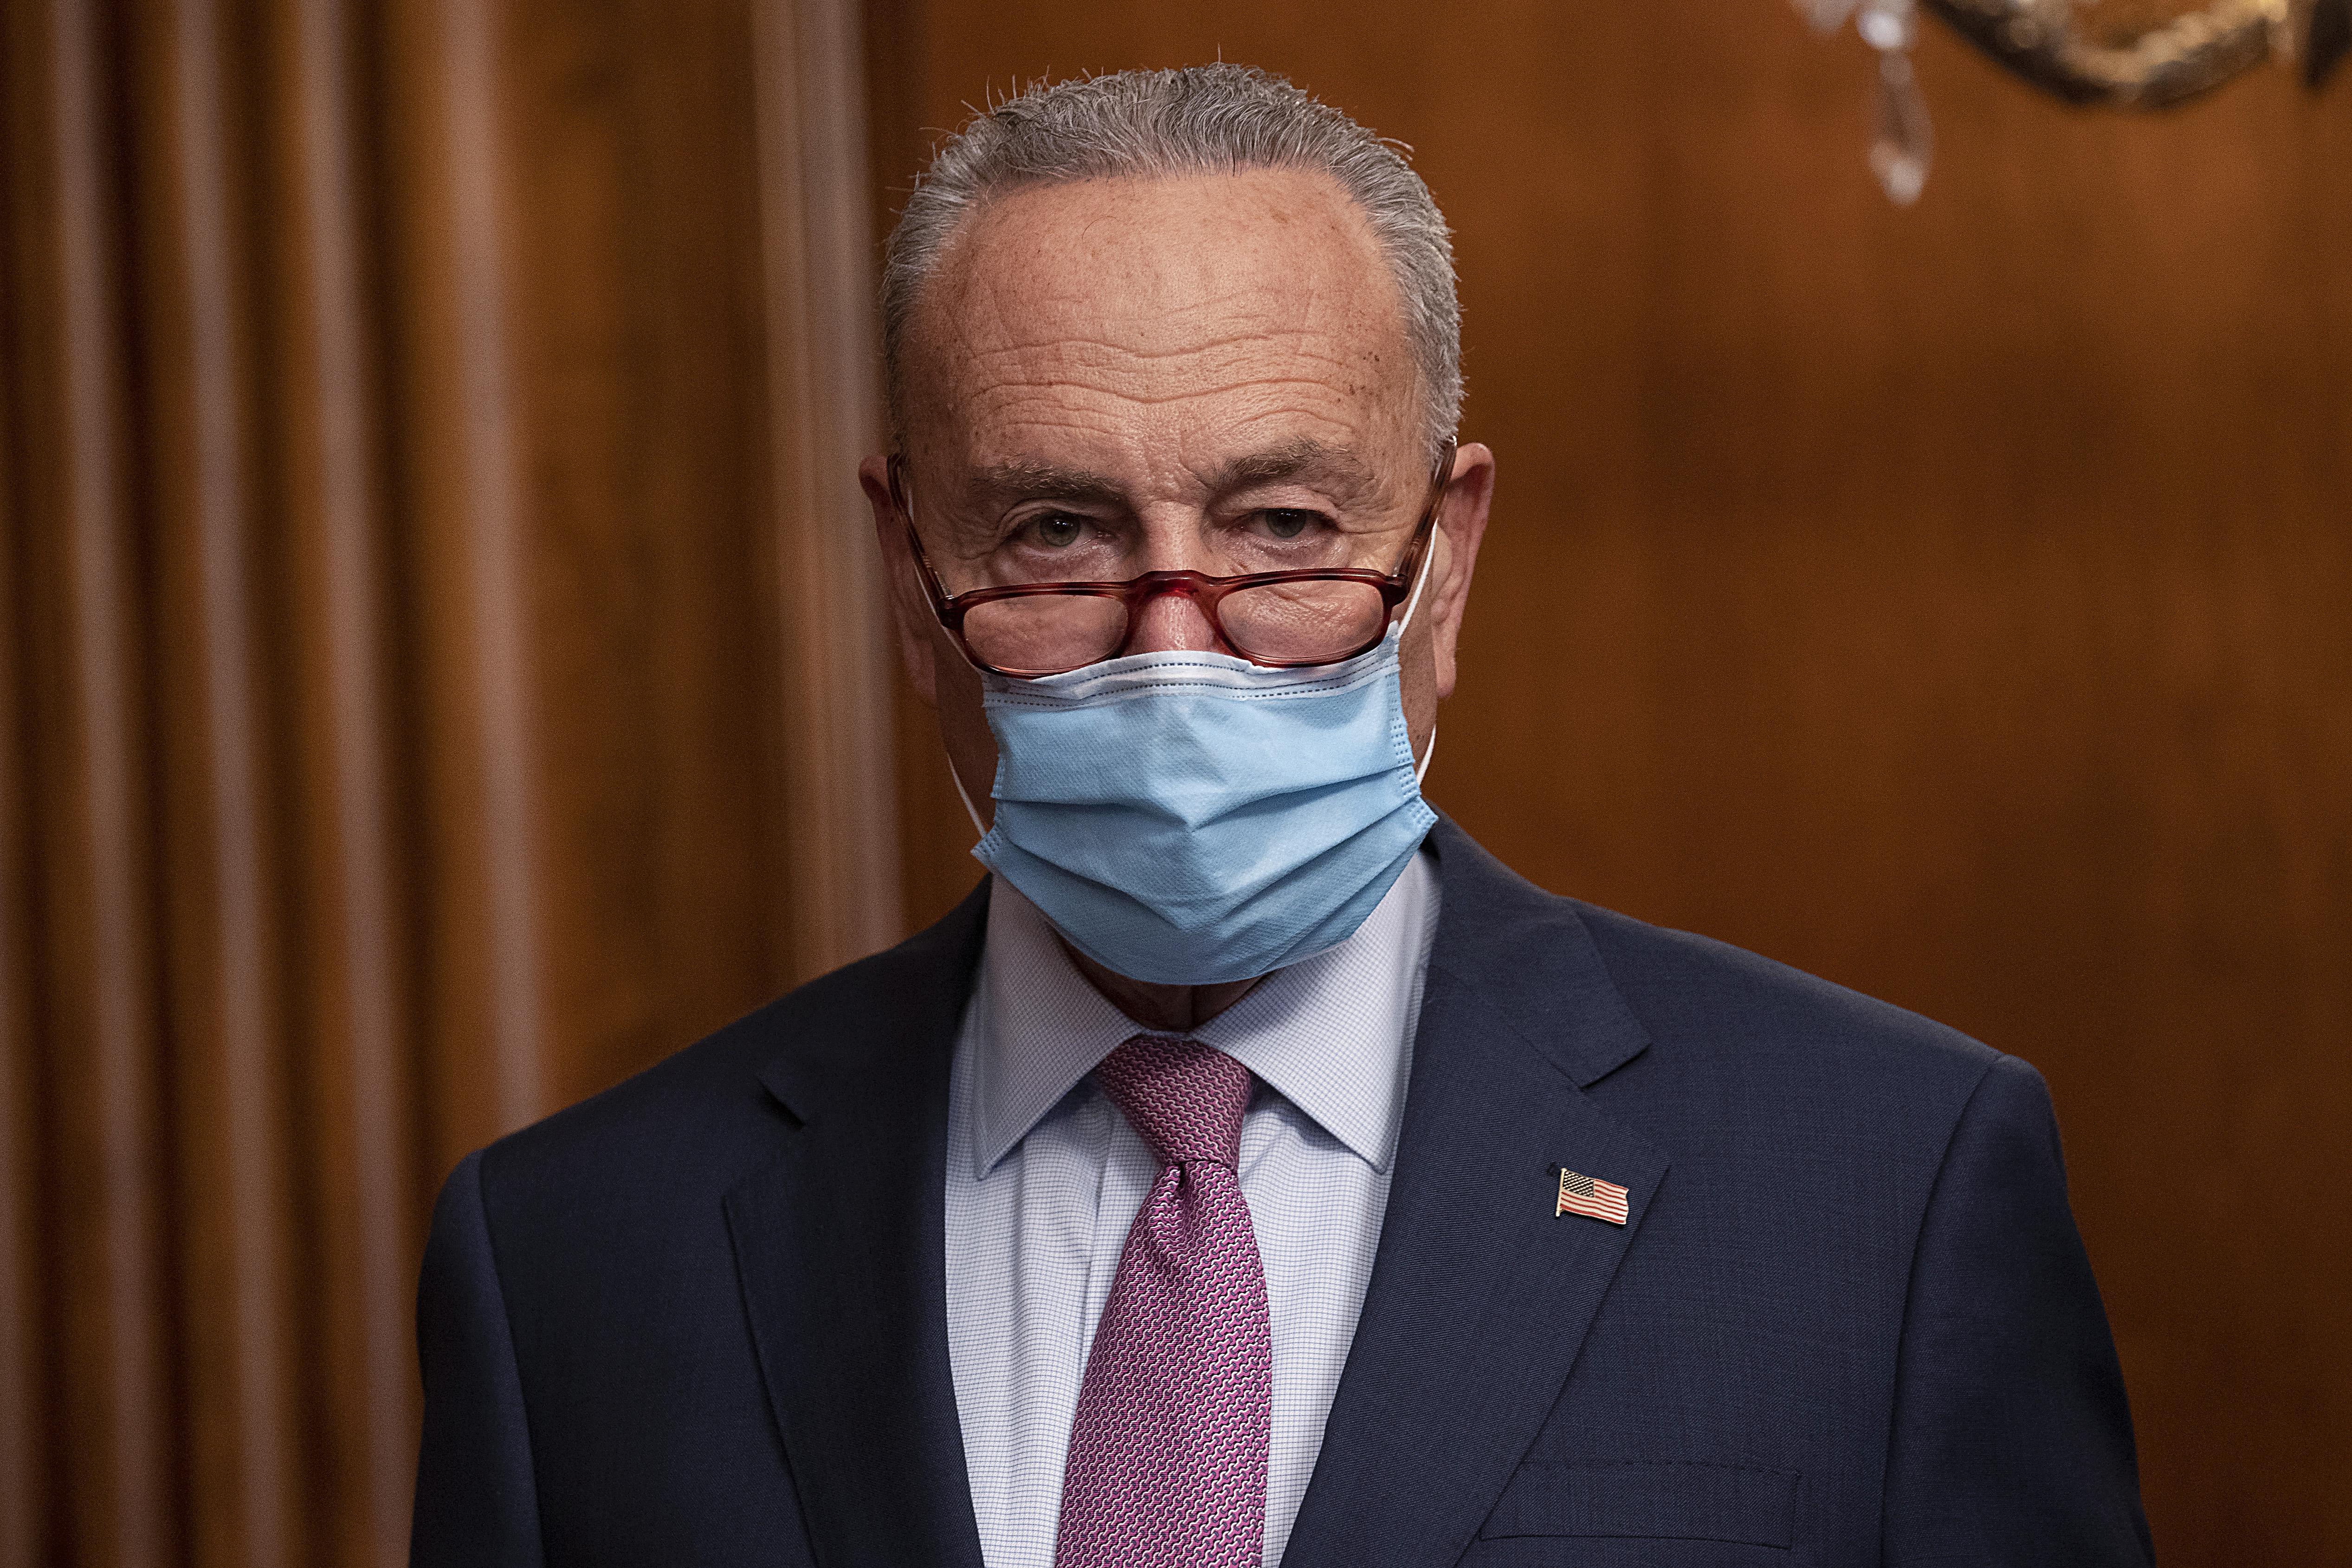 Chuck Schumer standing, wearing a mask, looking stern